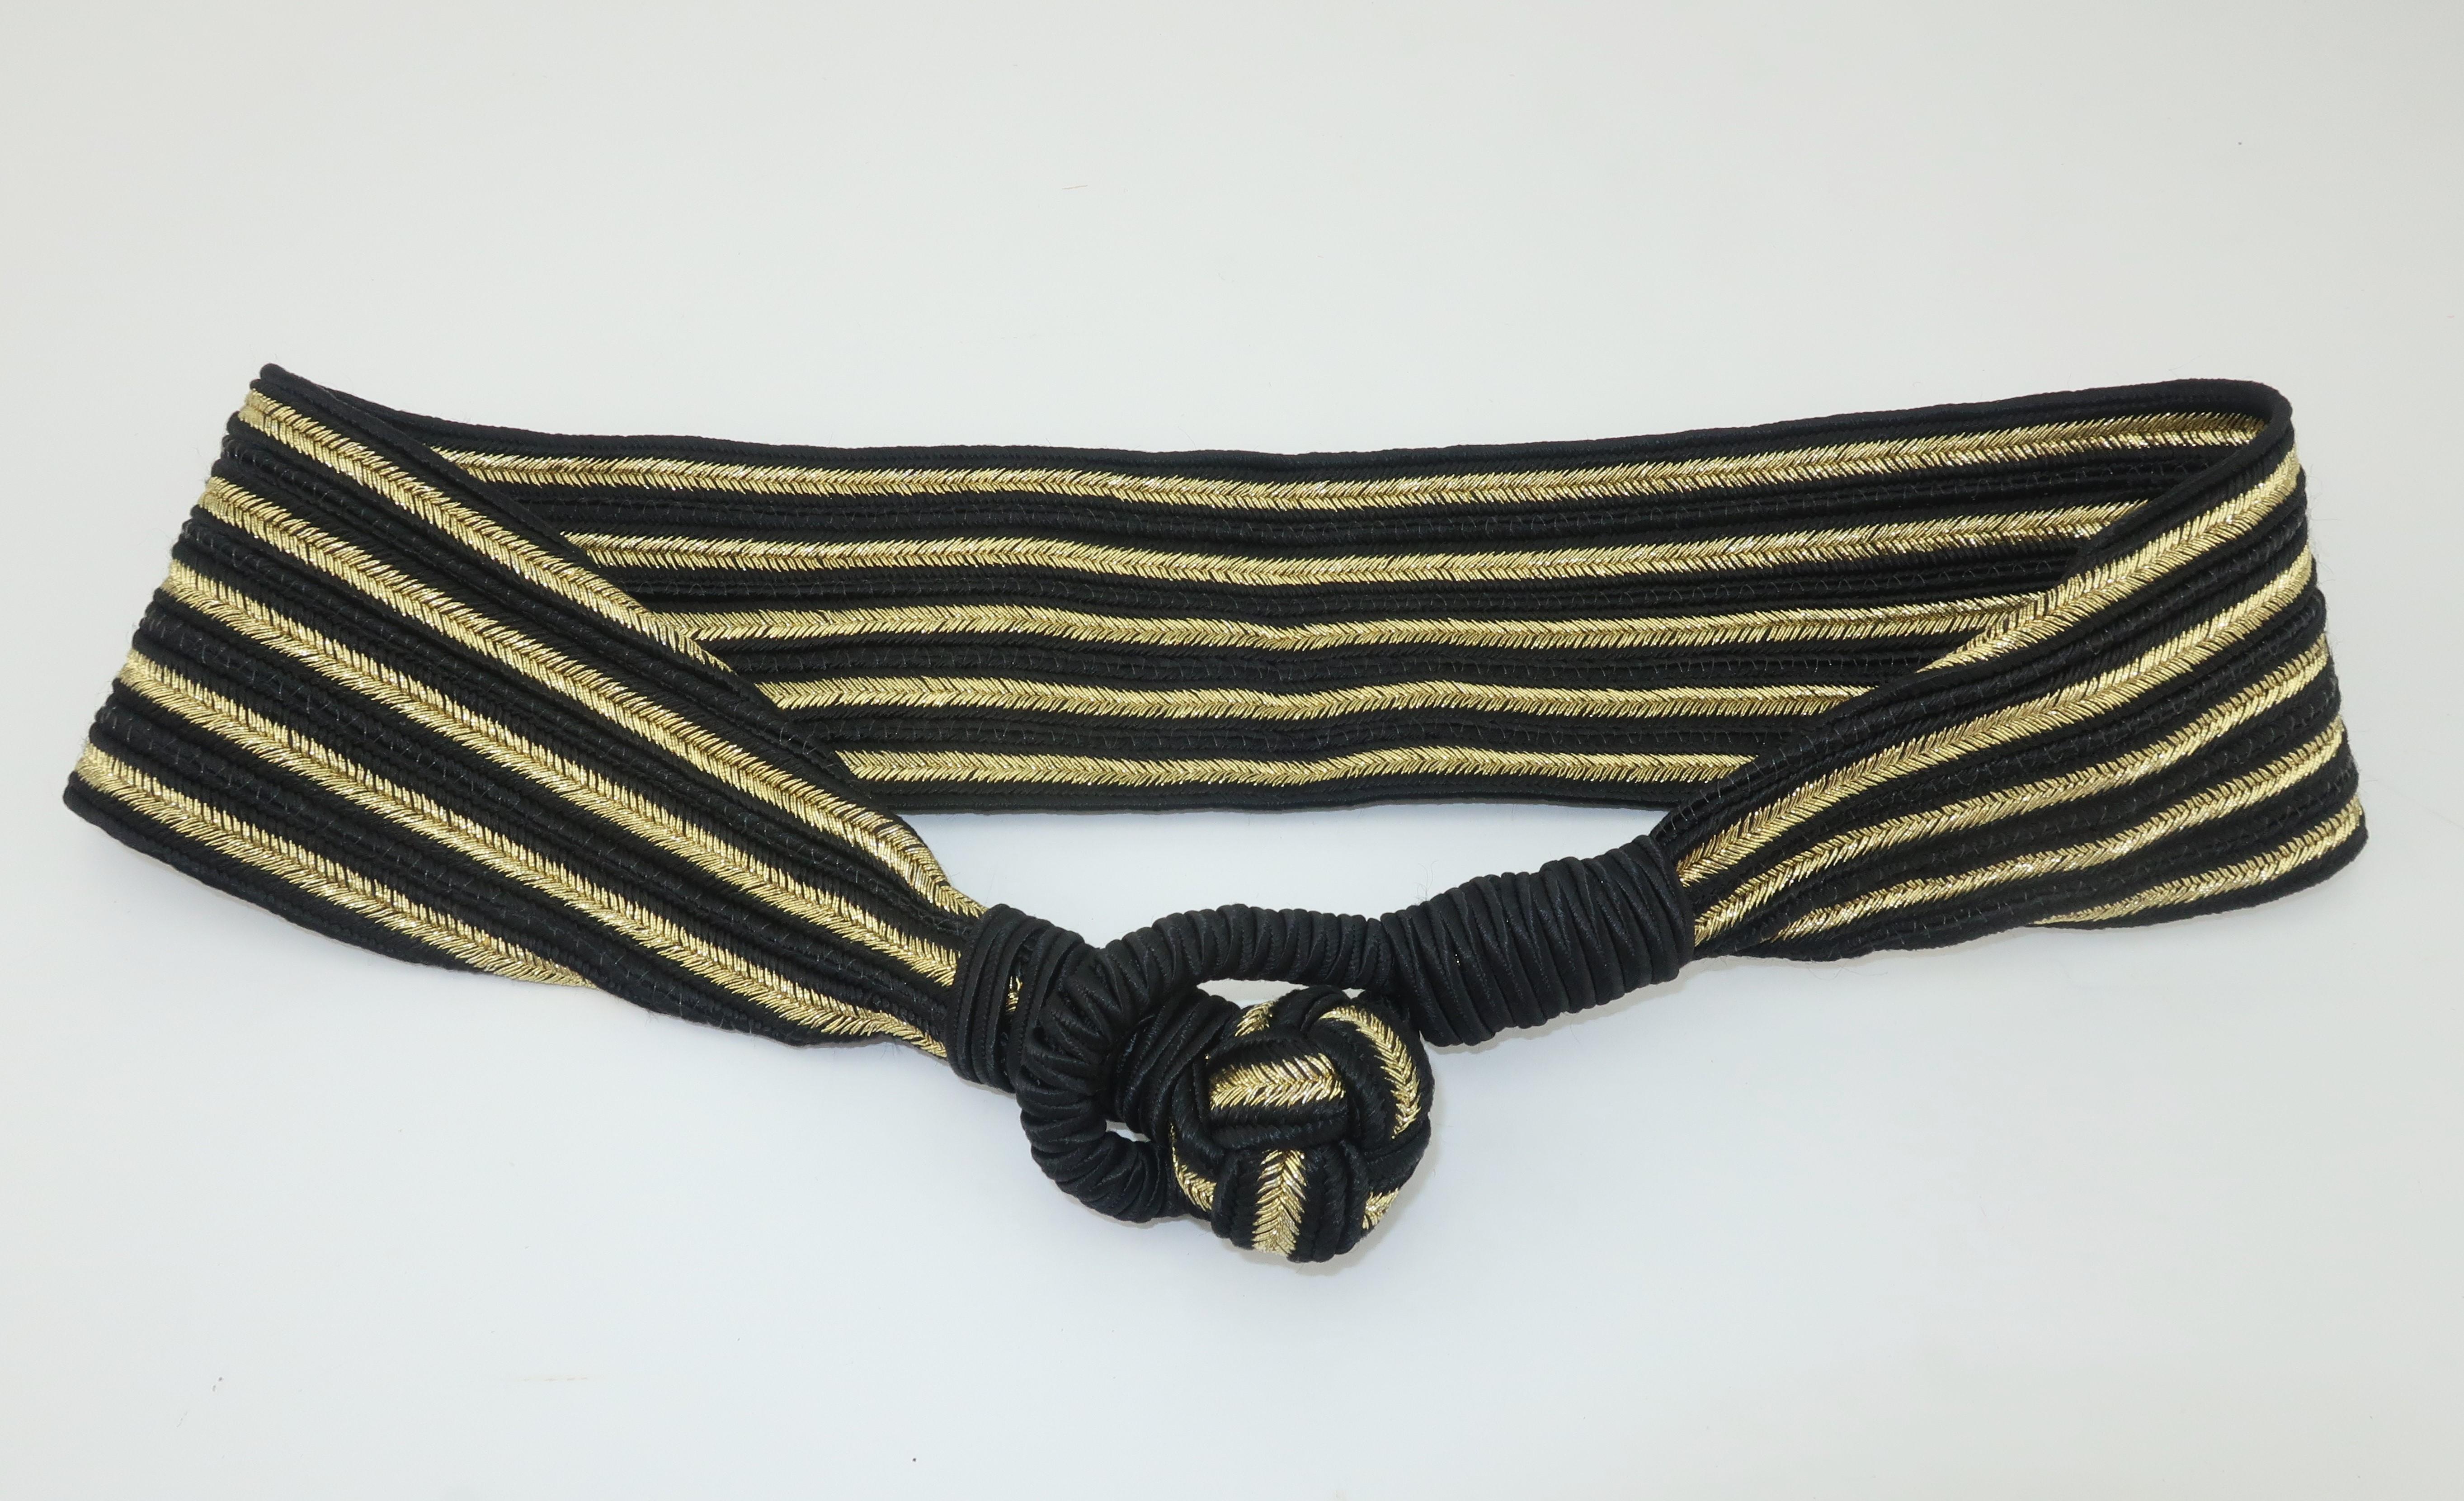 Cinch it in style with this black silk corded cummerbund belt with metallic gold stripes.  The frog closure adds a touch of the exotic making it a perfect pairing for vintage styles ranging from art deco inspirations of the 1930's to disco fashions